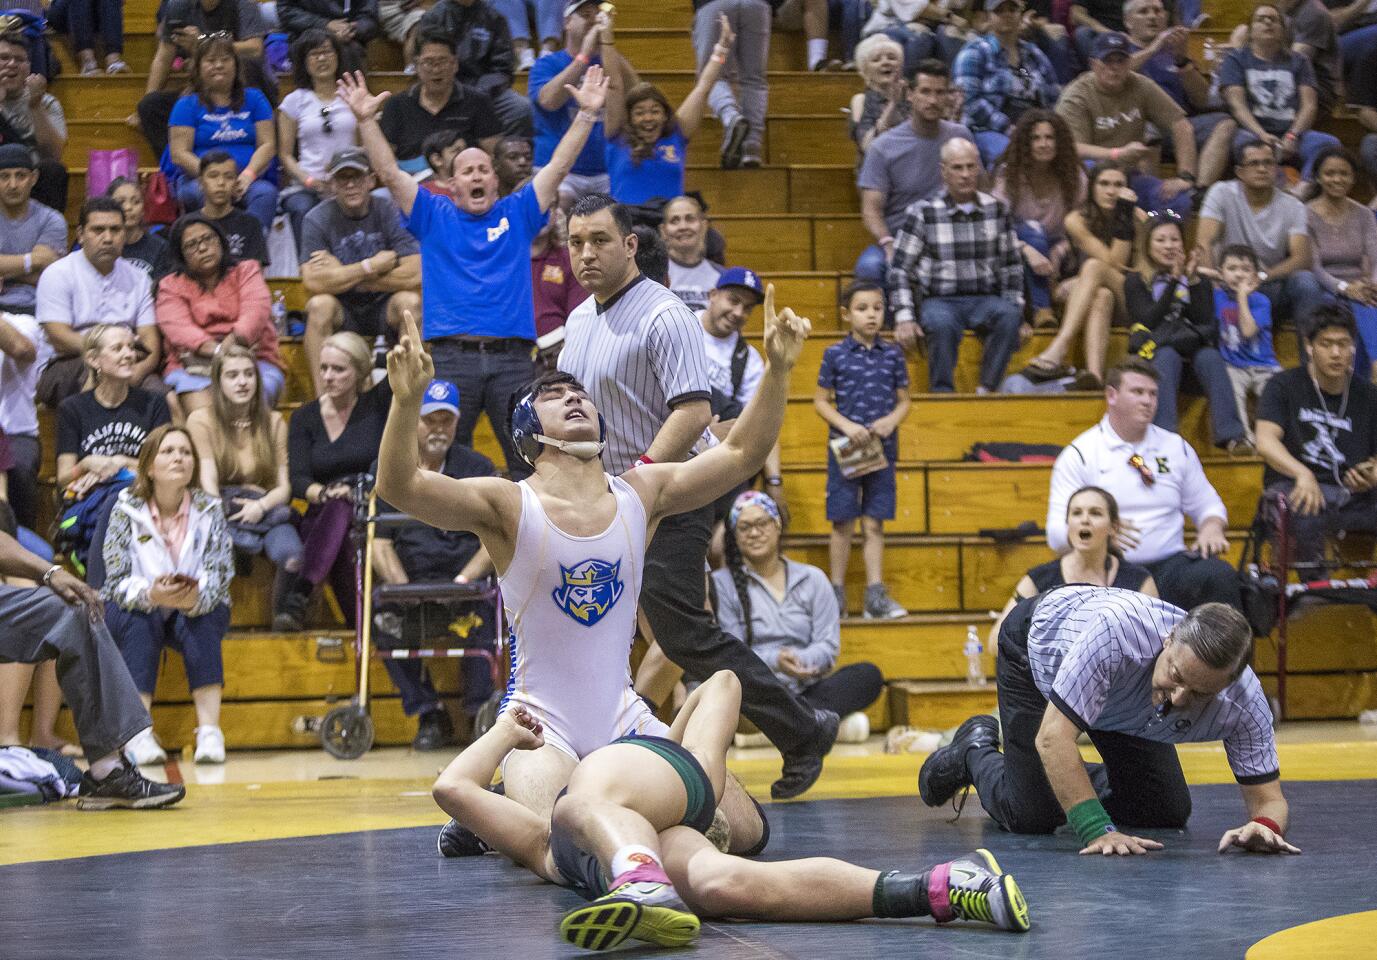 Fountain ValleyÕs Trenton Ching celebrates after pinning PacificaÕs Tim Brown in the 160 pound weight class during the CIF Southern Section Southern Division Wrestling Championships at Brea Olinda High School on Saturday, February 17.